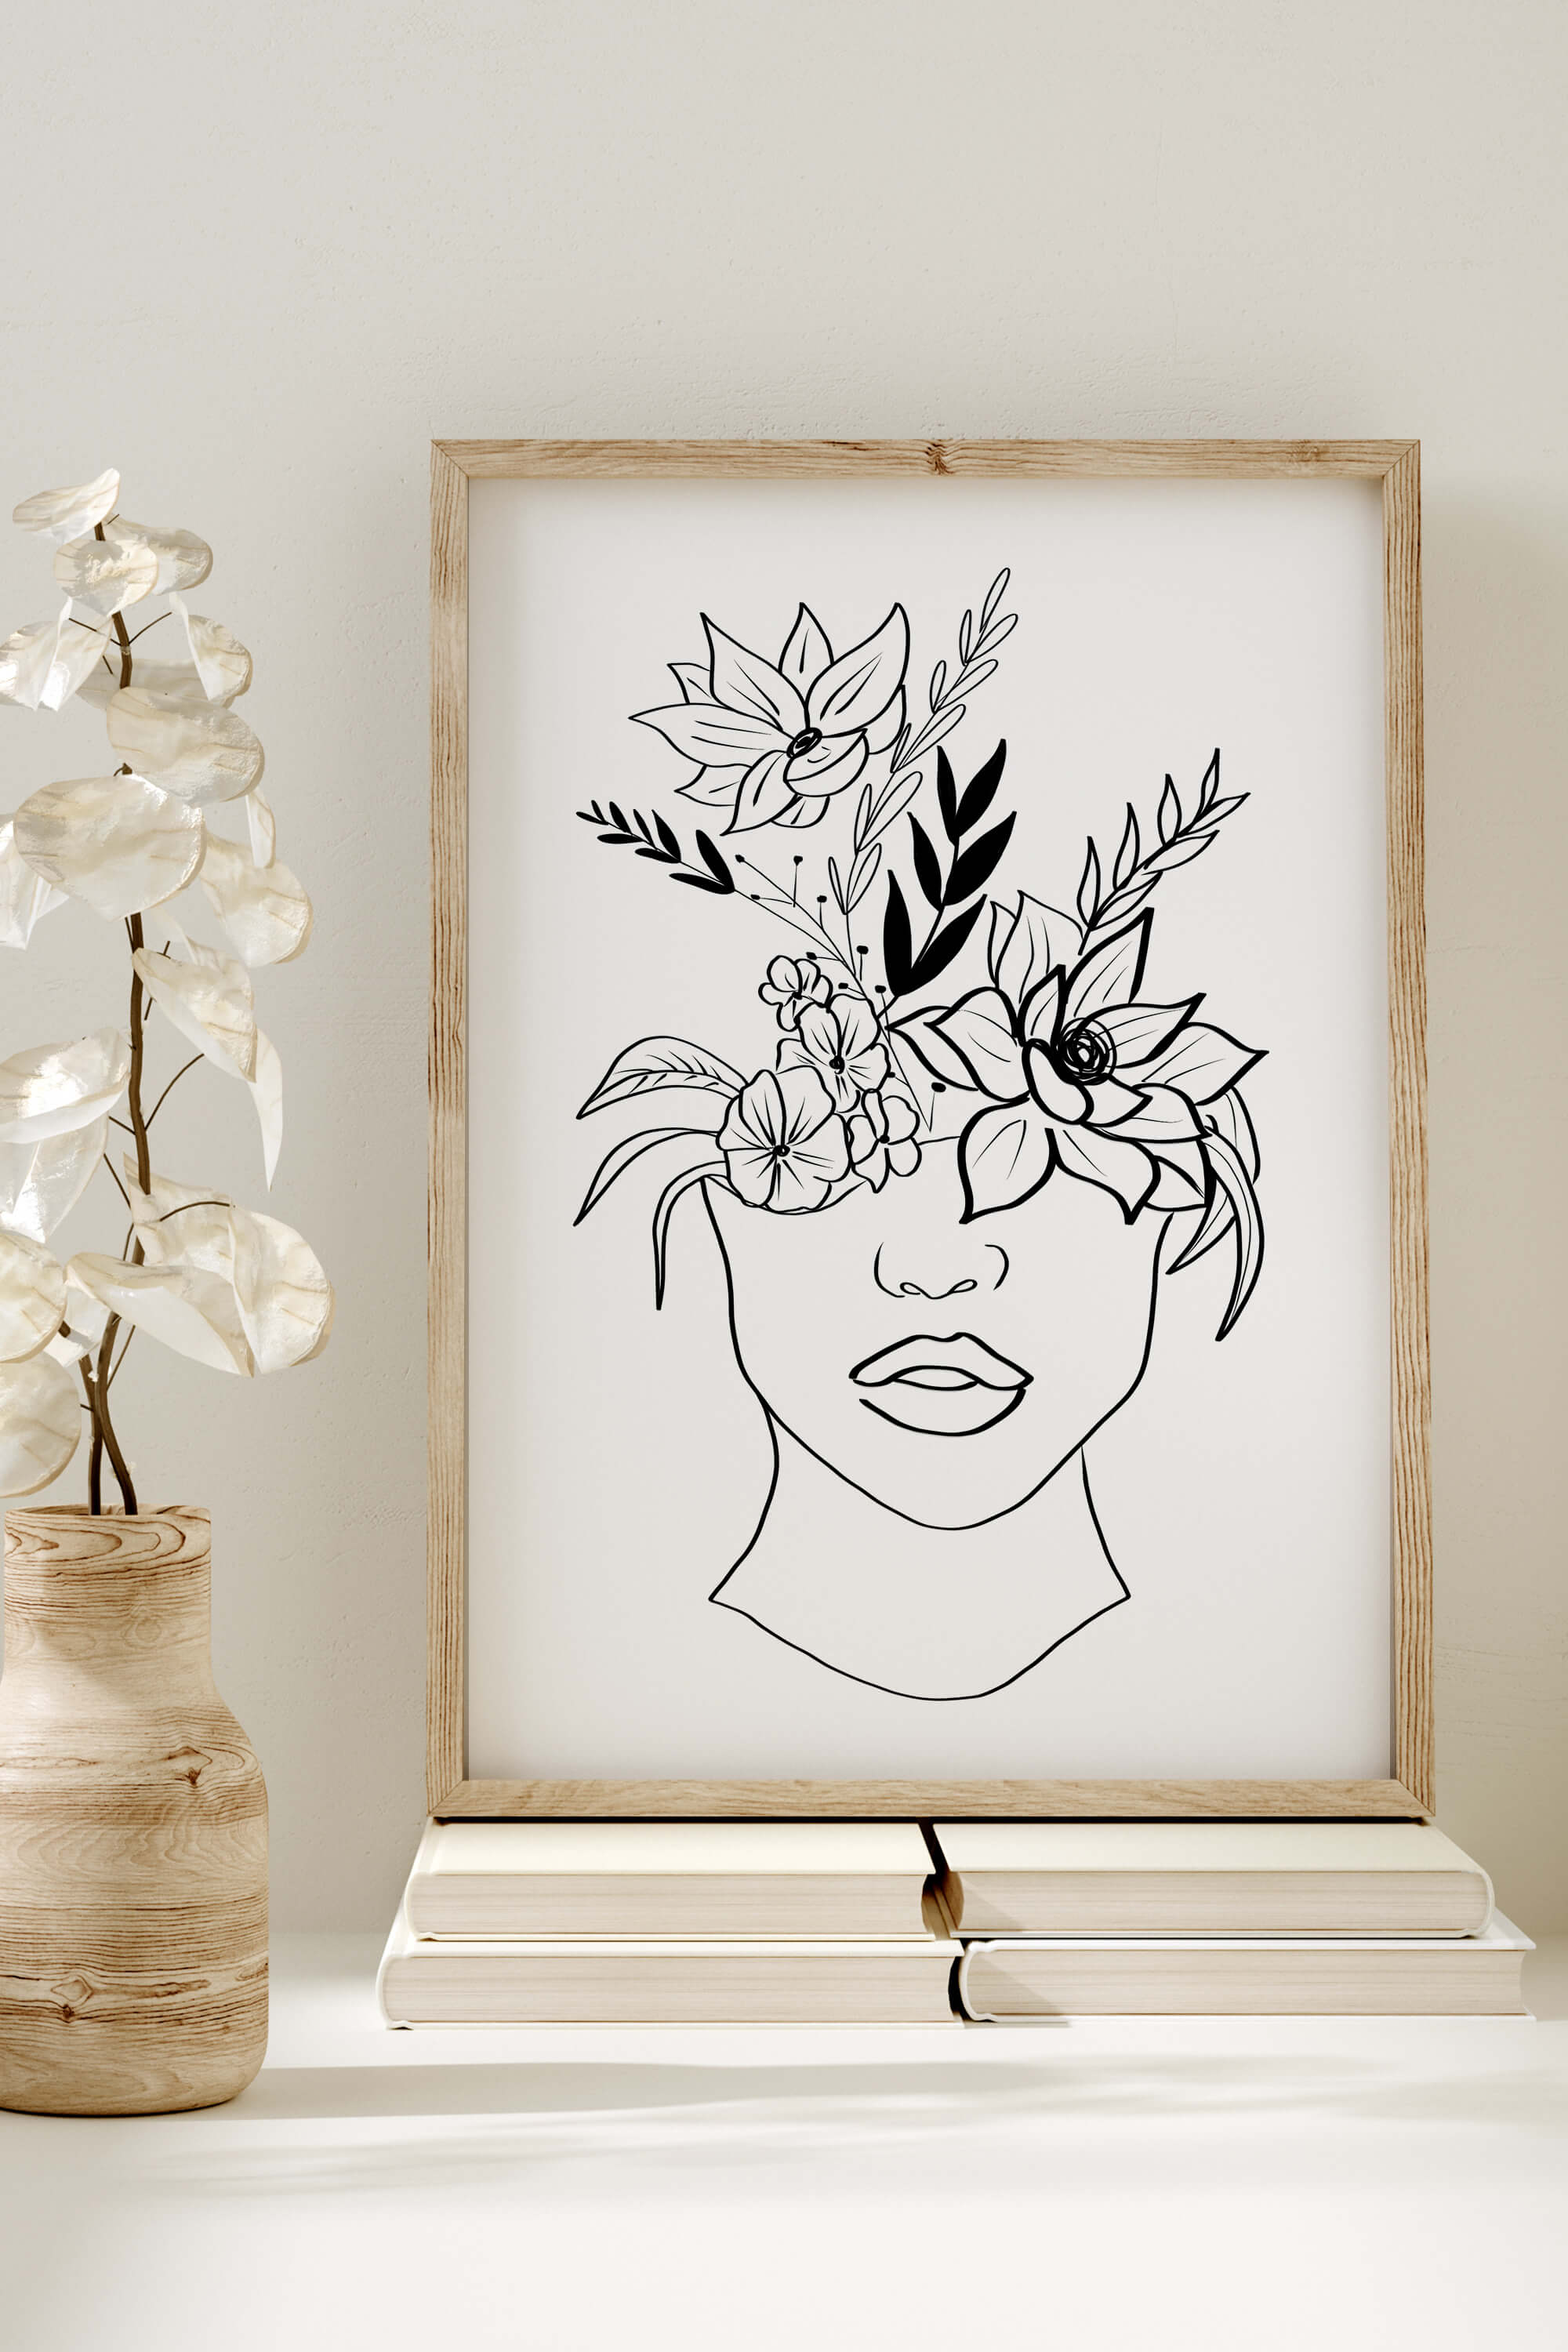 Elegant female illustration in black and white. This floral head woman art print combines simplicity and sophistication, creating a timeless monochrome masterpiece.